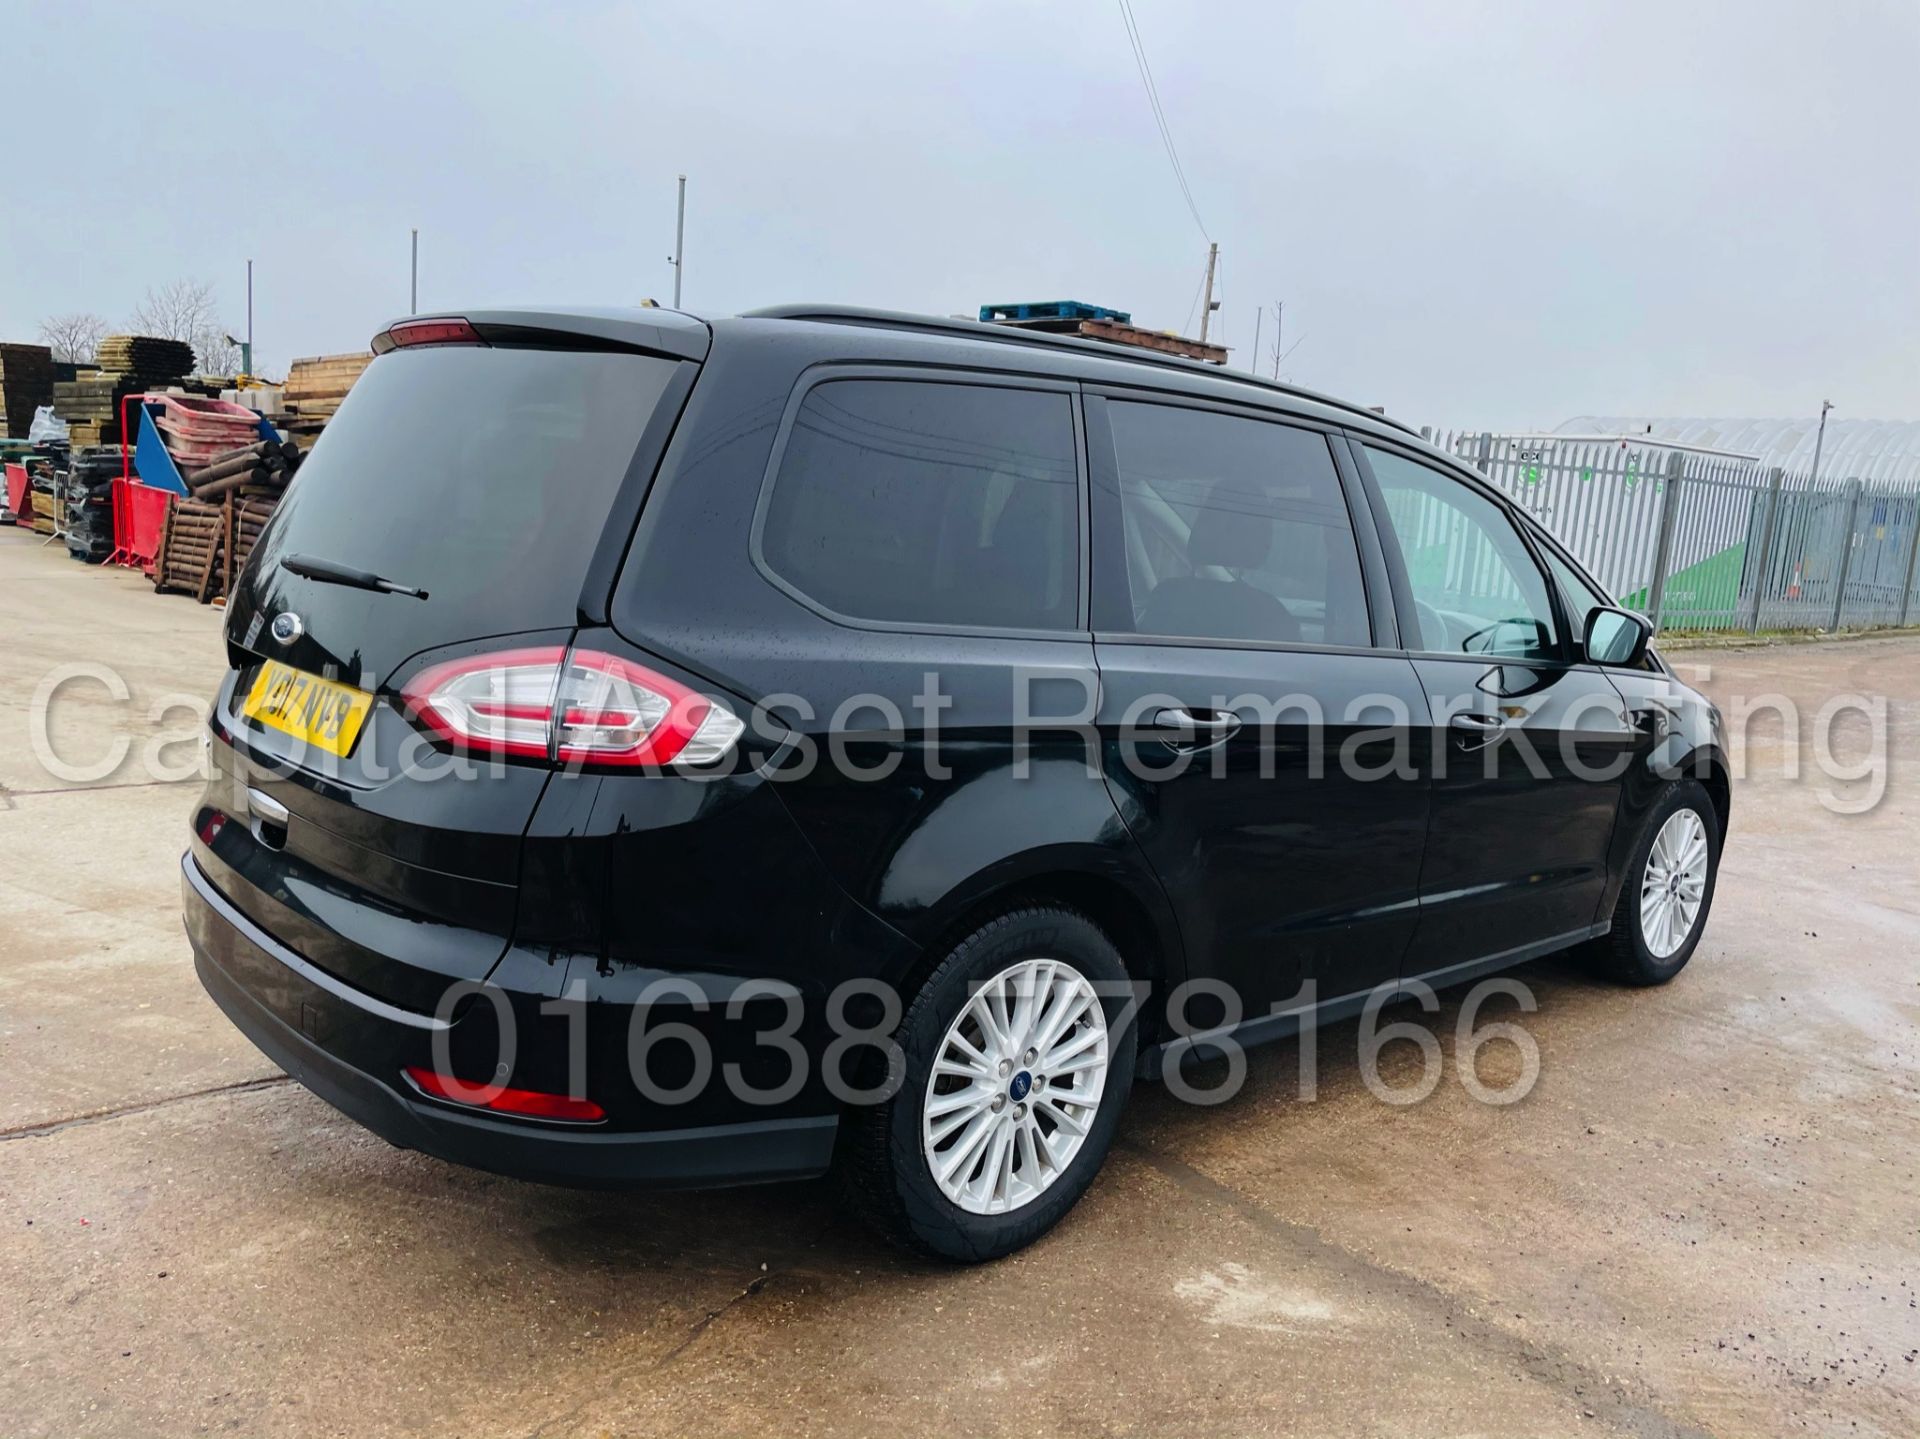 ON SALE FORD GALAXY *ZETEC EDITION* 7 SEATER MPV (2017 - EURO 6) '2.0 TDCI - AUTO' (- FULL HISTORY) - Image 13 of 48